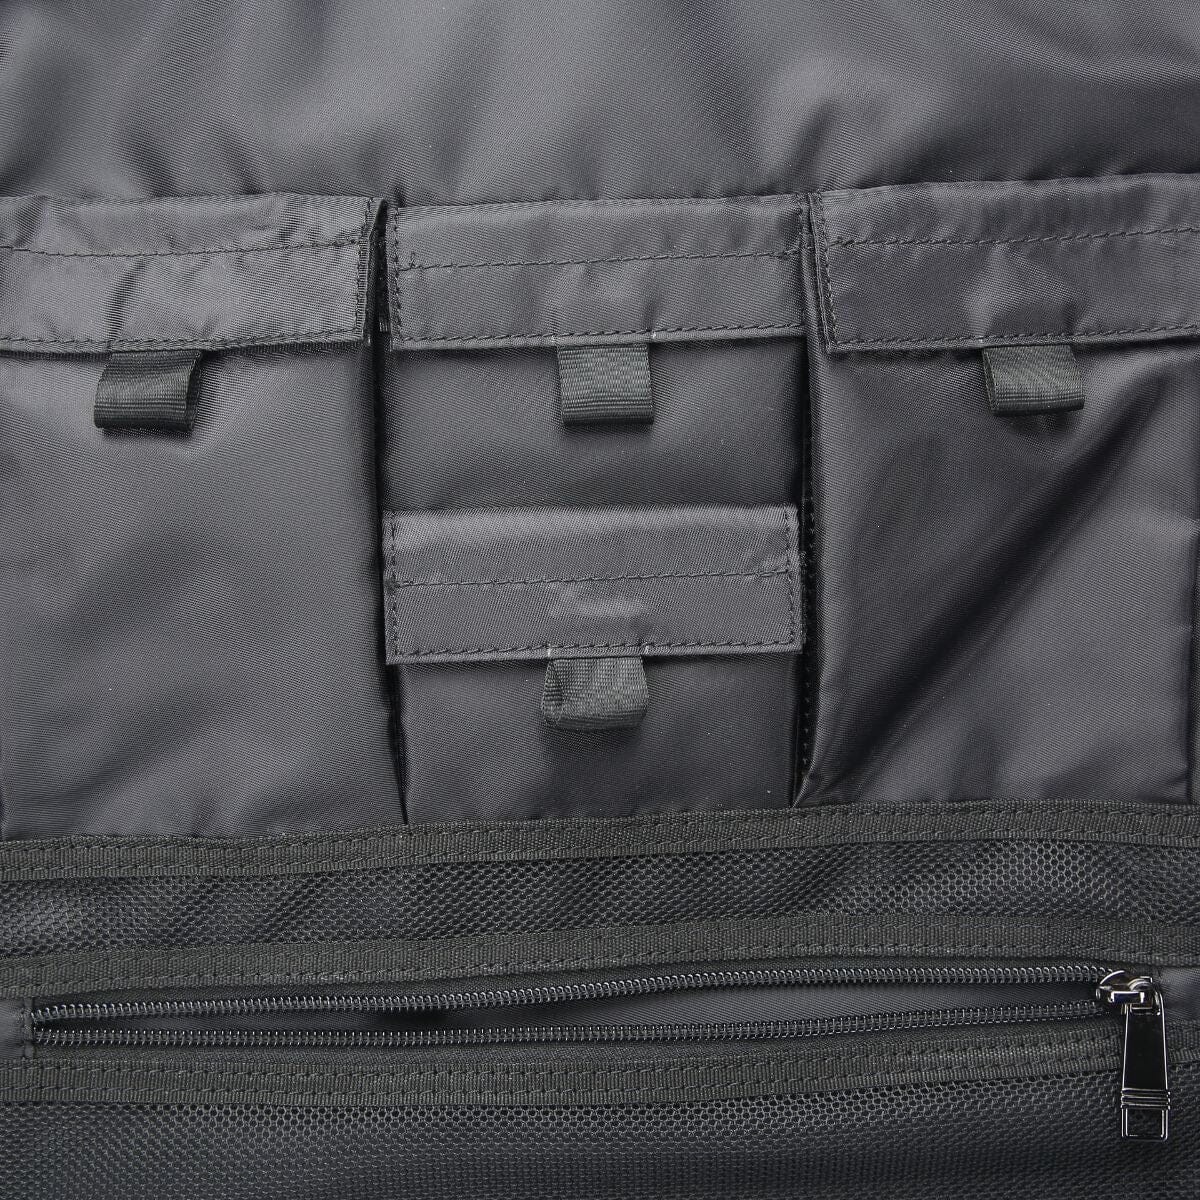 5.11 Tactical Bags, The best prices online in Malaysia